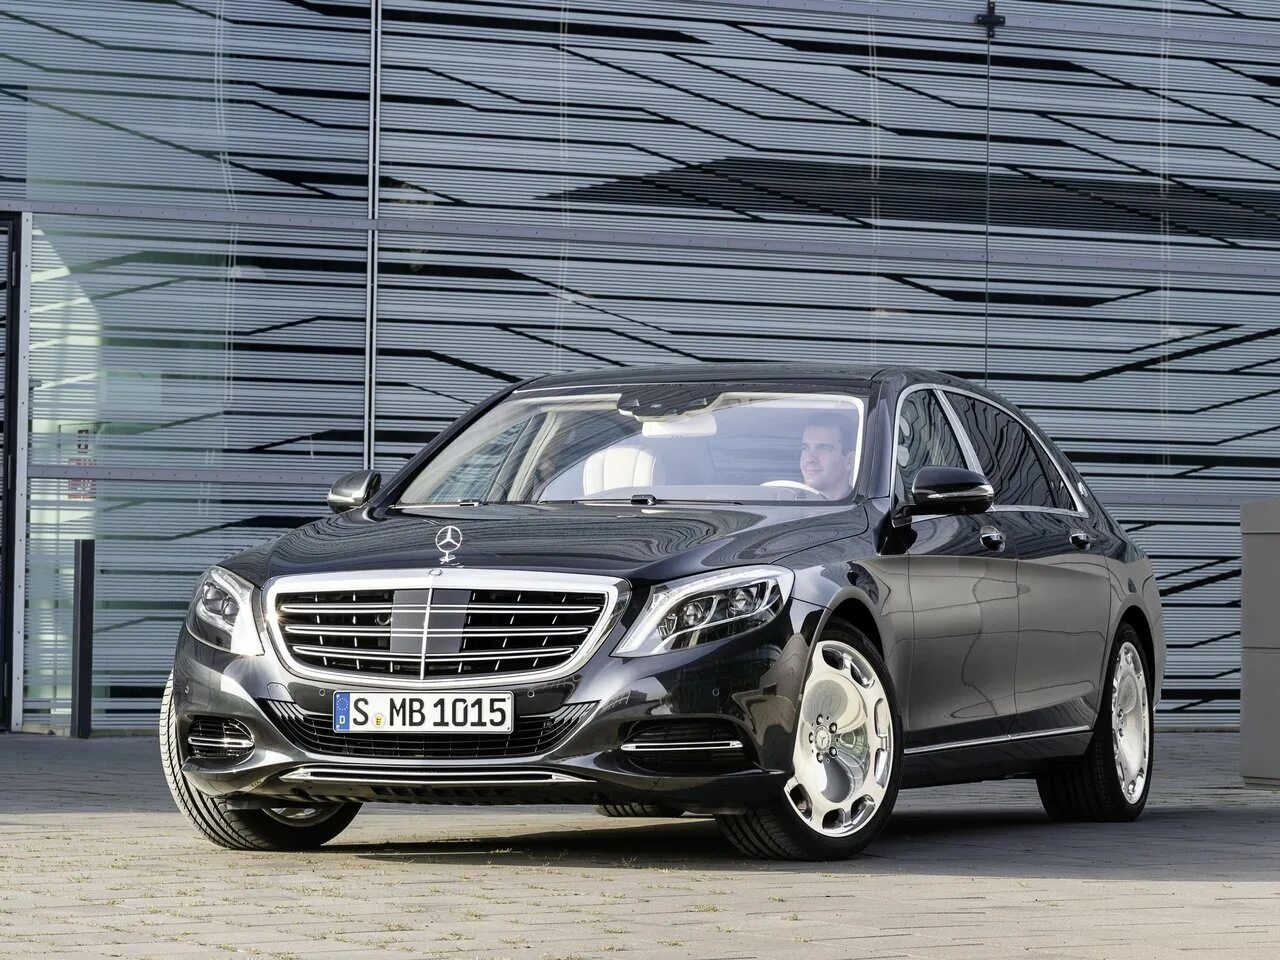 Mercedes Benz Maybach. Мерседес Бенц Майбах s600. Mercedes Benz 222 Maybach. Mercedes Benz s class Maybach.